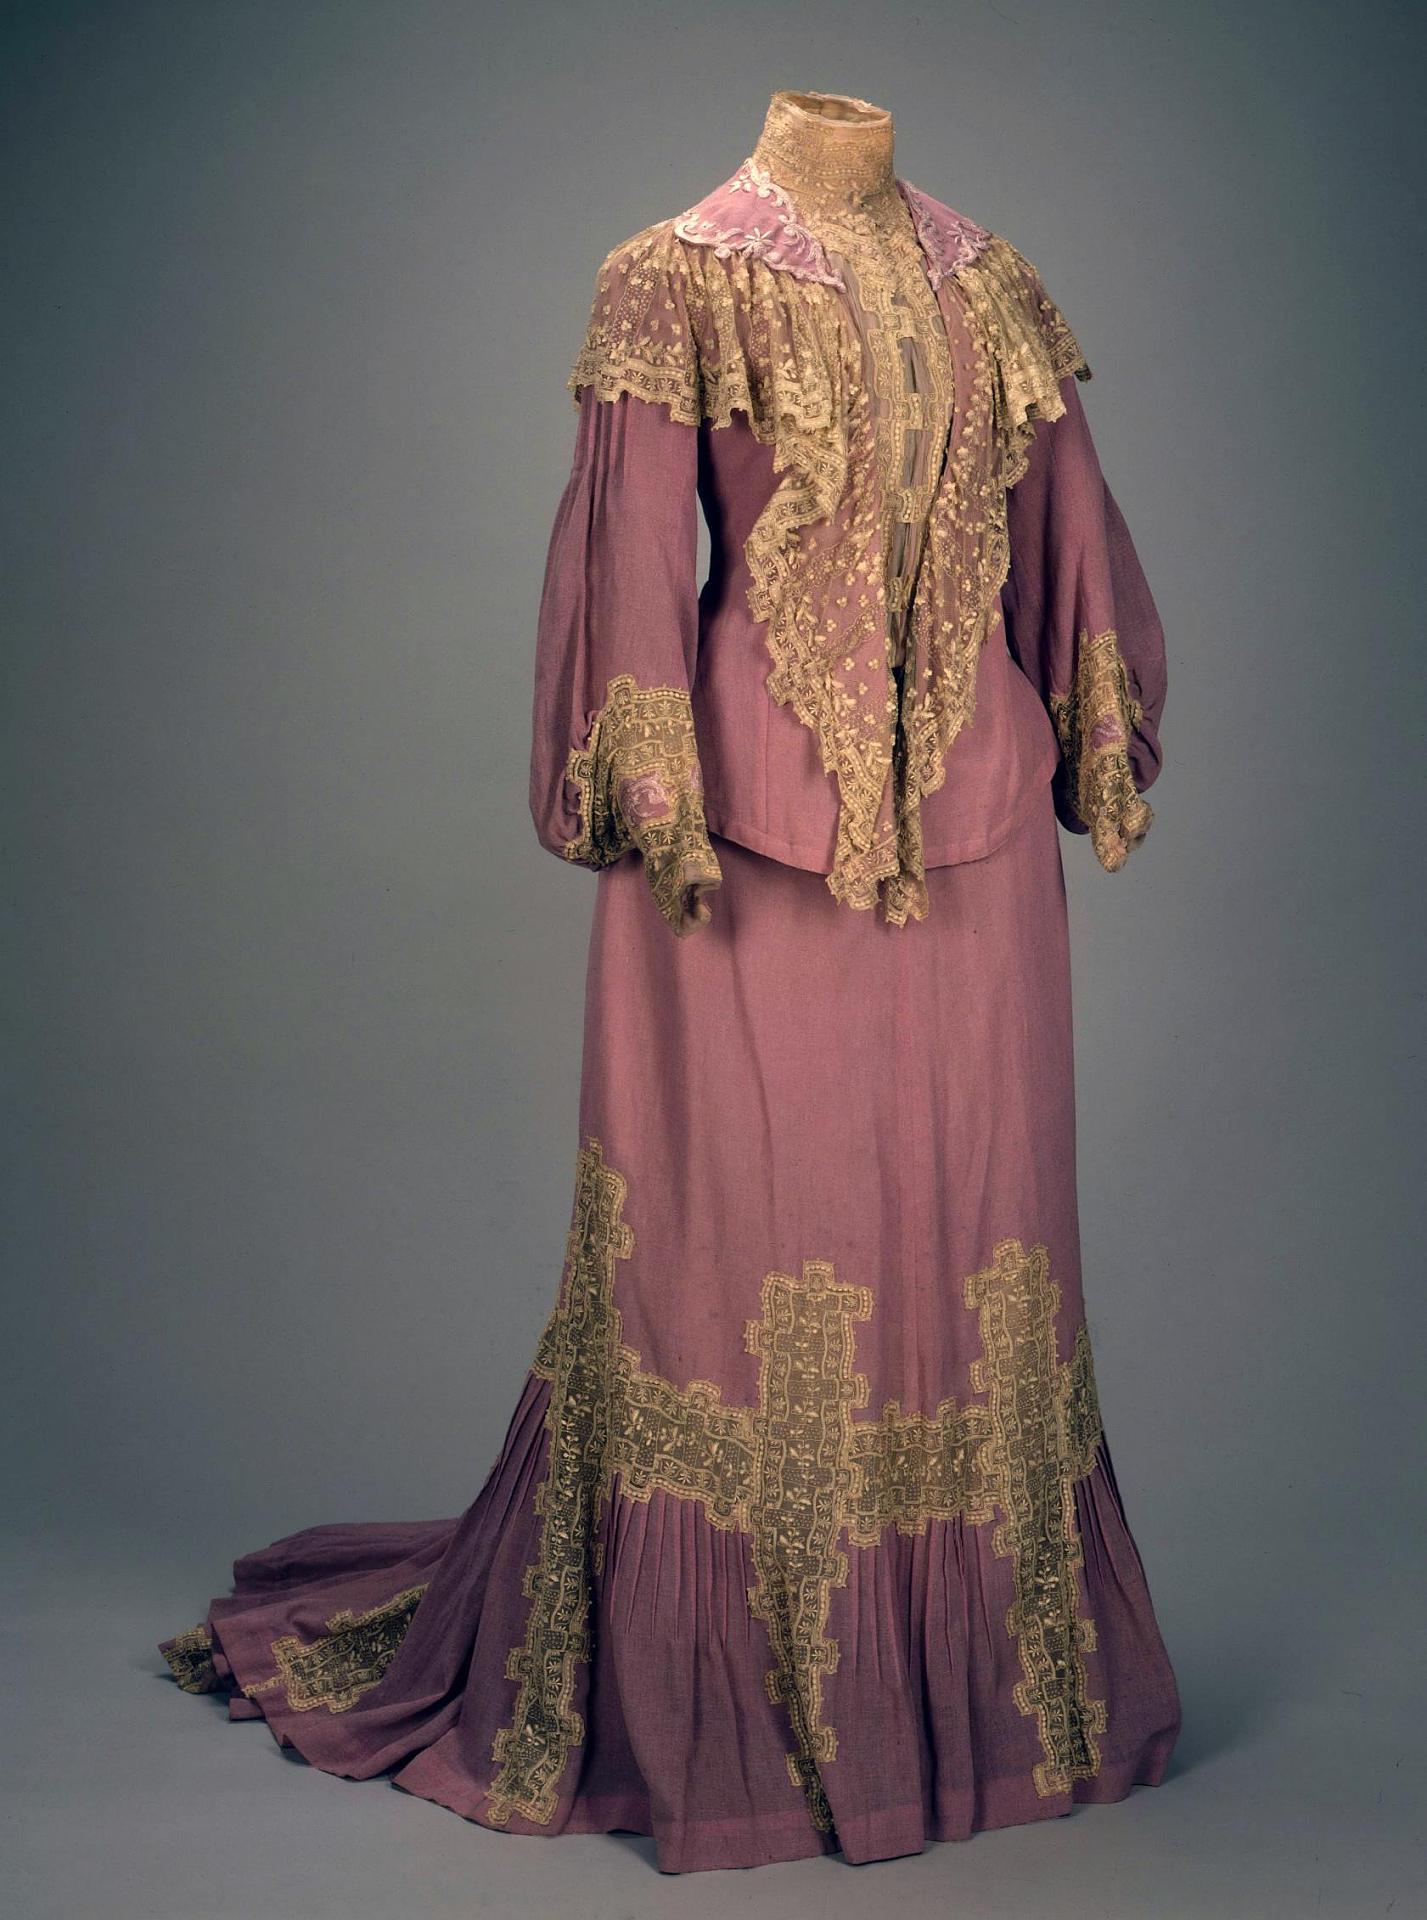 Empress Alexandra Feodorovna pregnancy outfit, 1904, c.The State Hermitage Museum, 2018